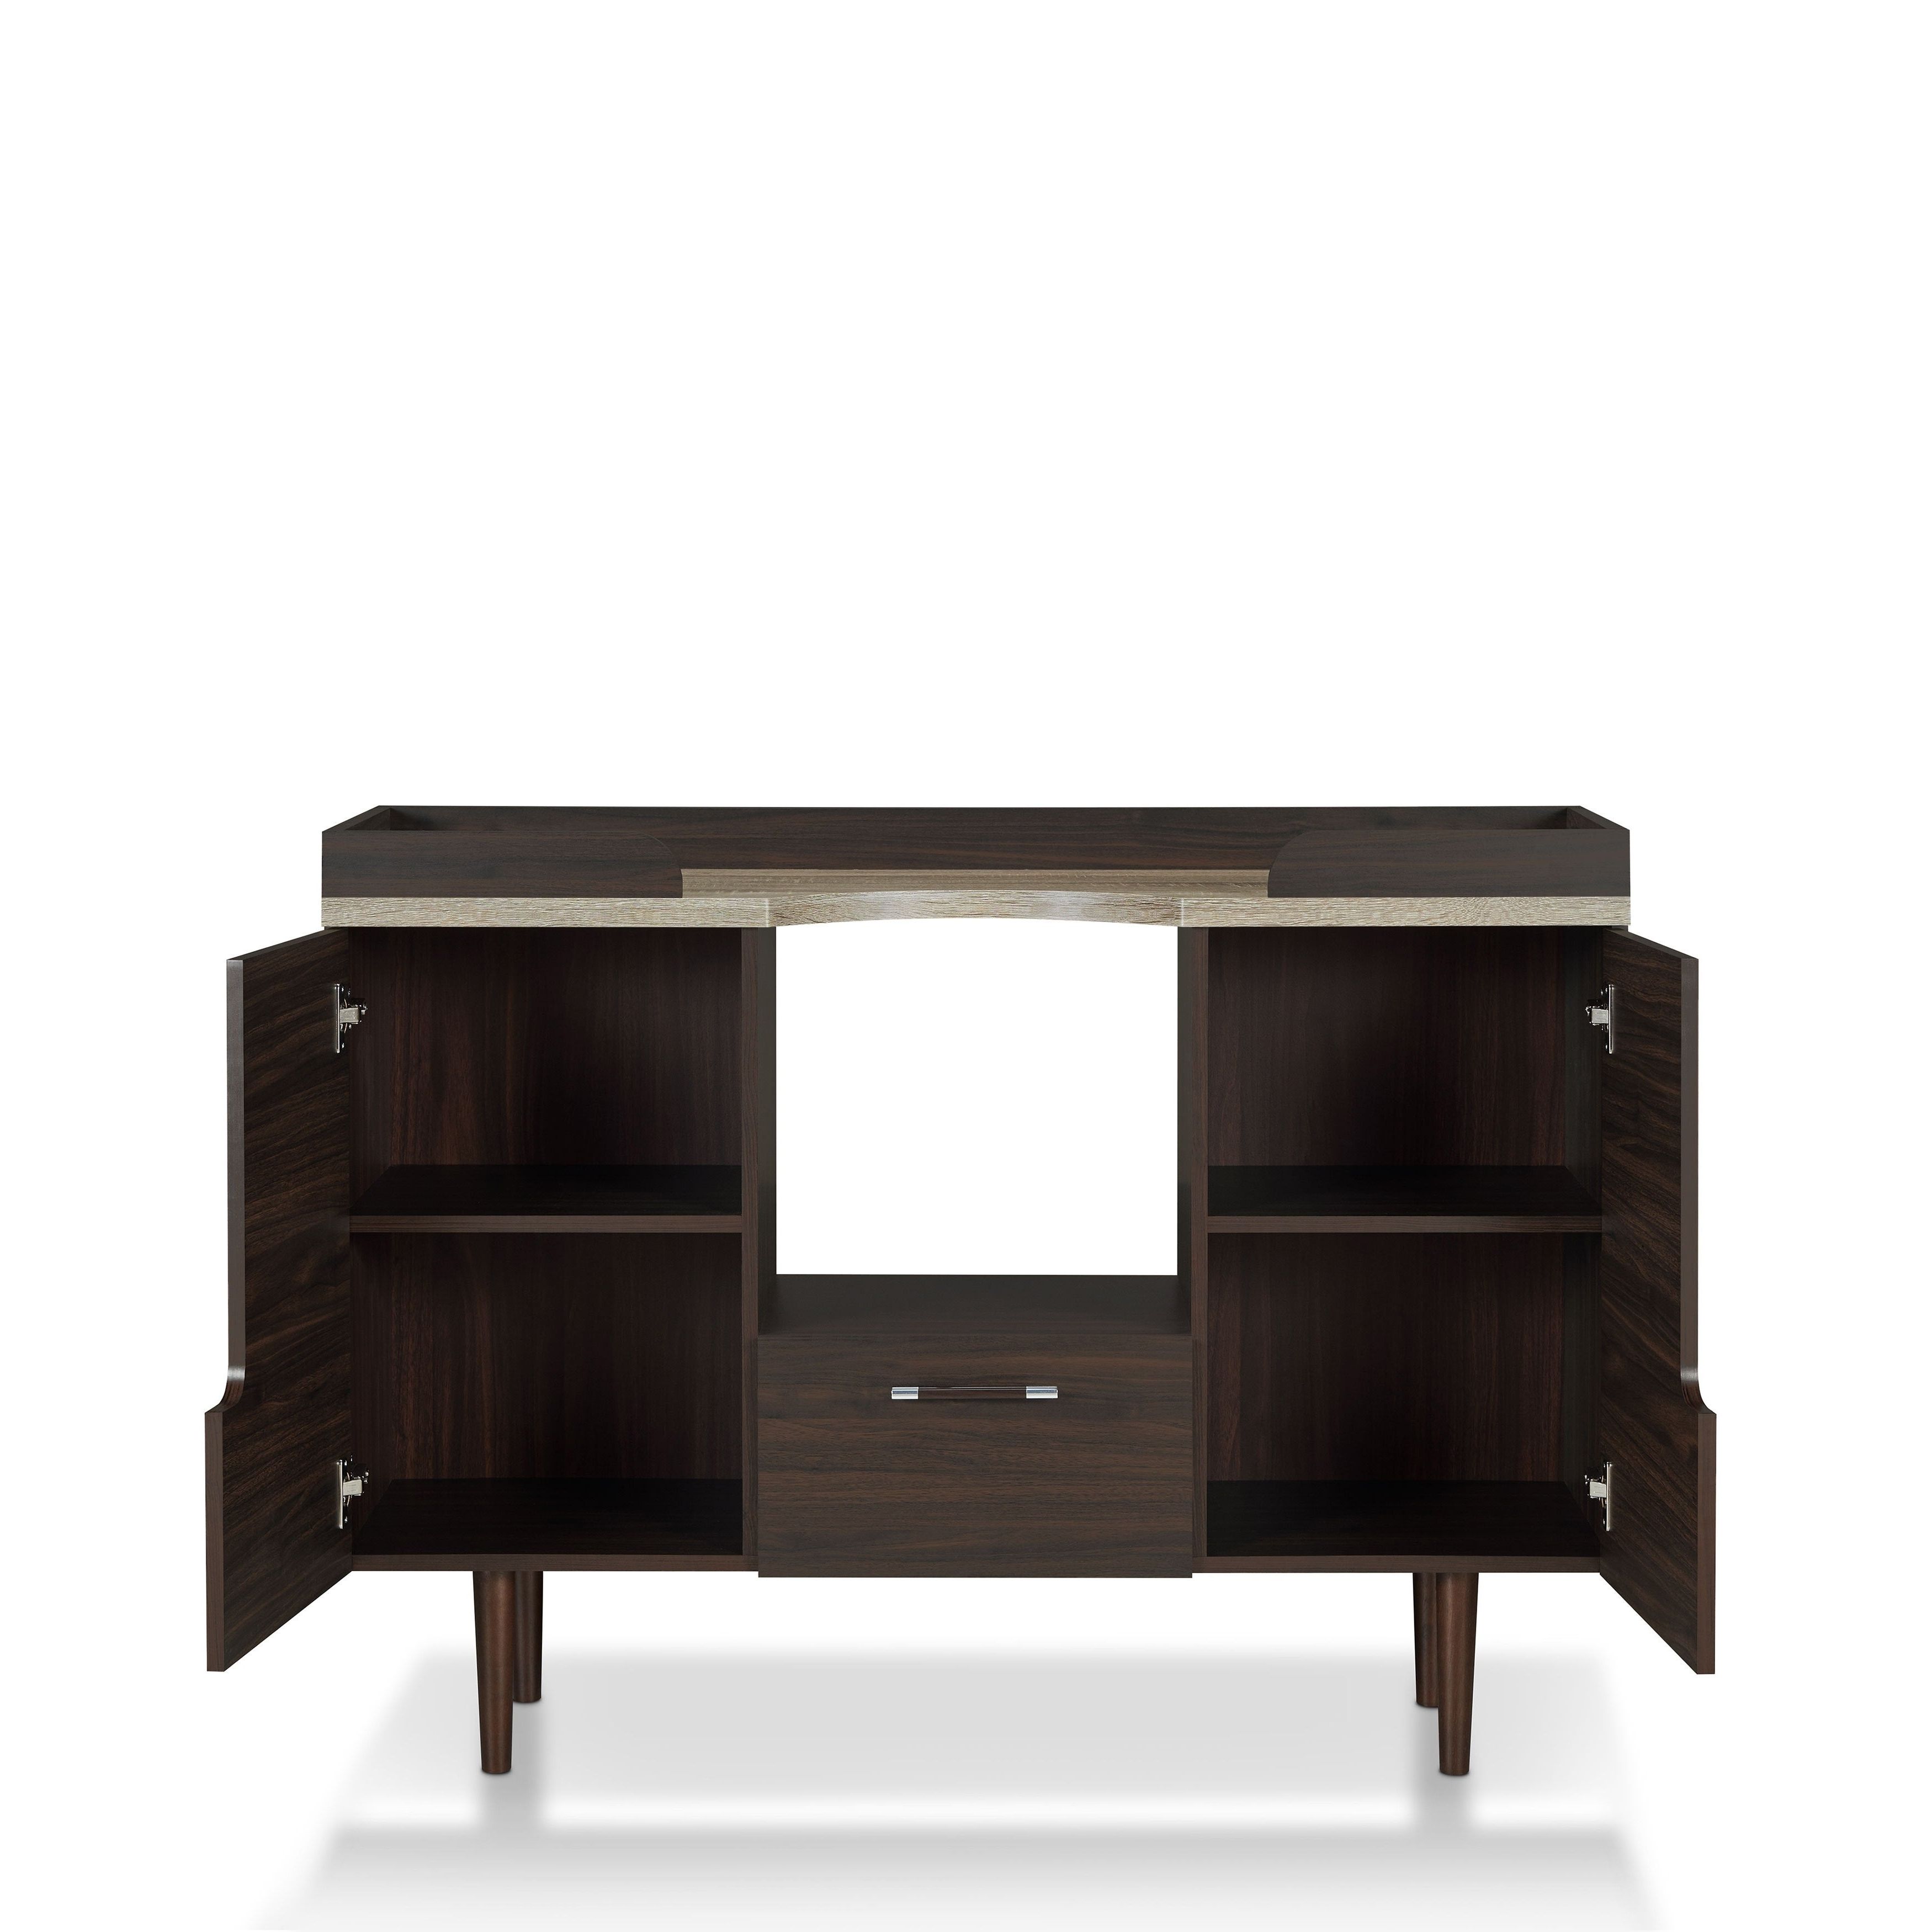 Pattermon Mid Century Modern Two Tone Wenge Buffet Serverfoa Within Modern Two Tone Buffets (Gallery 17 of 20)